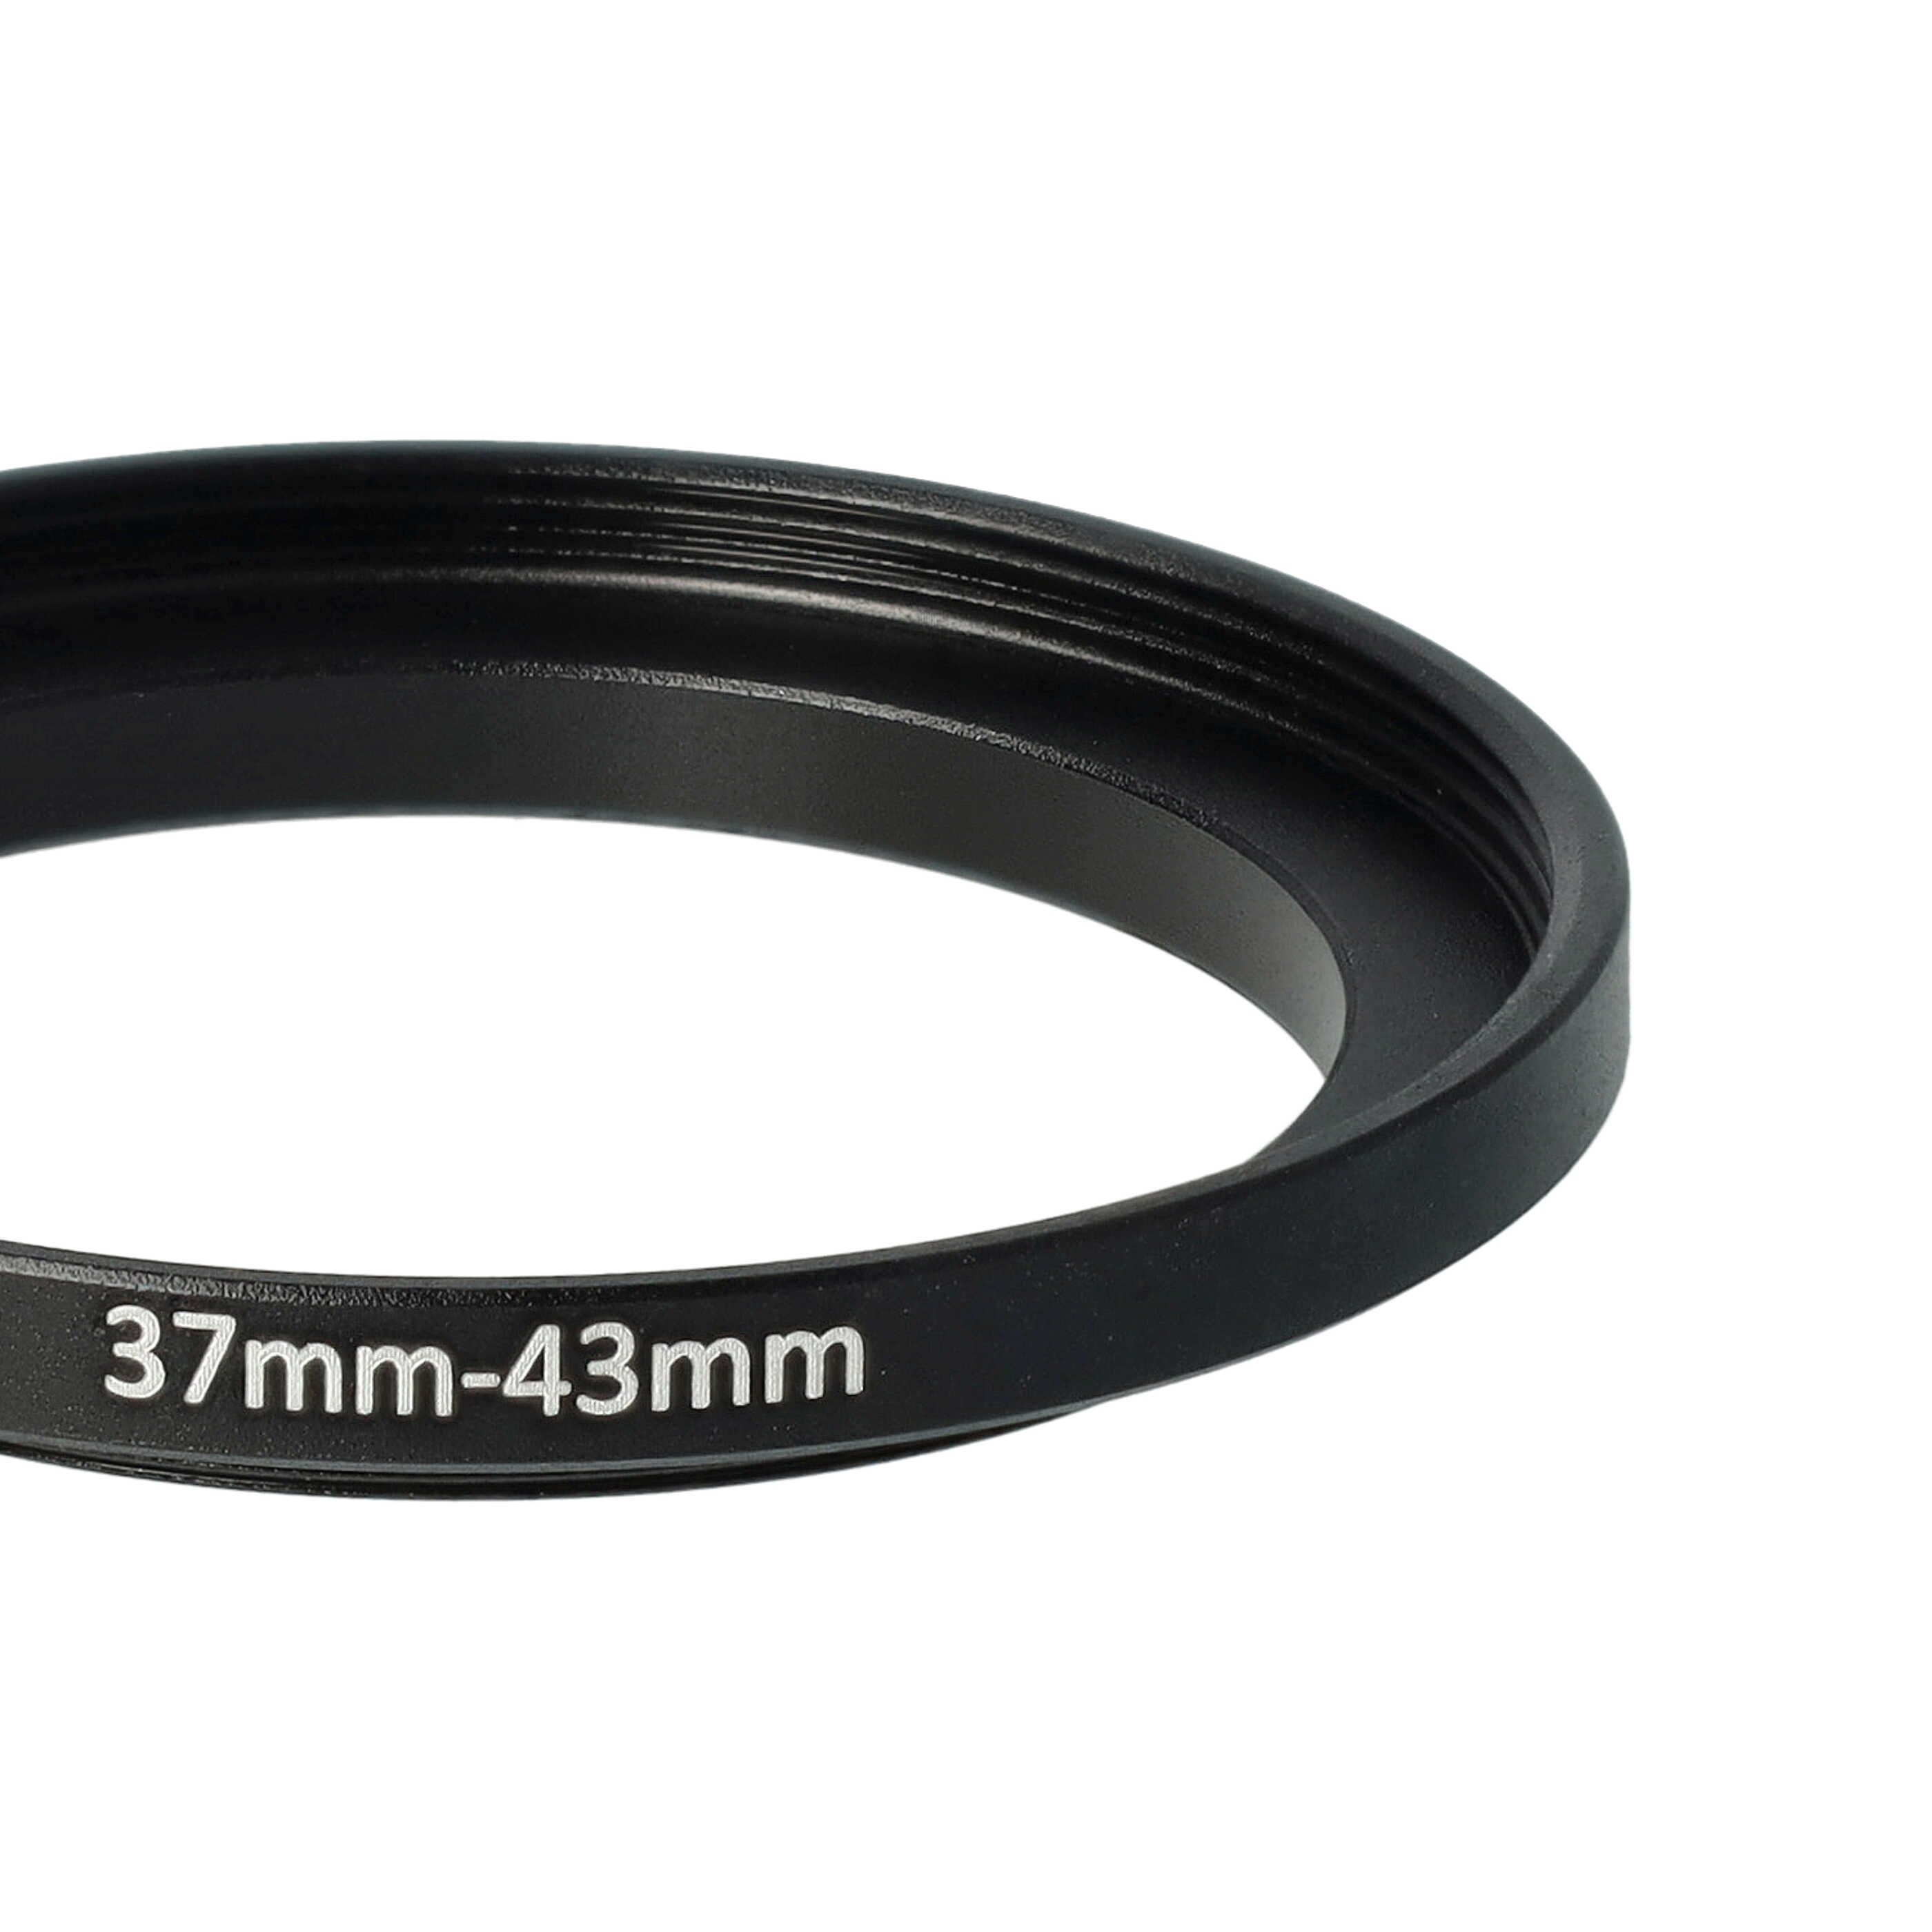 Step-Up Ring Adapter of 37 mm to 43 mmfor various Camera Lens - Filter Adapter